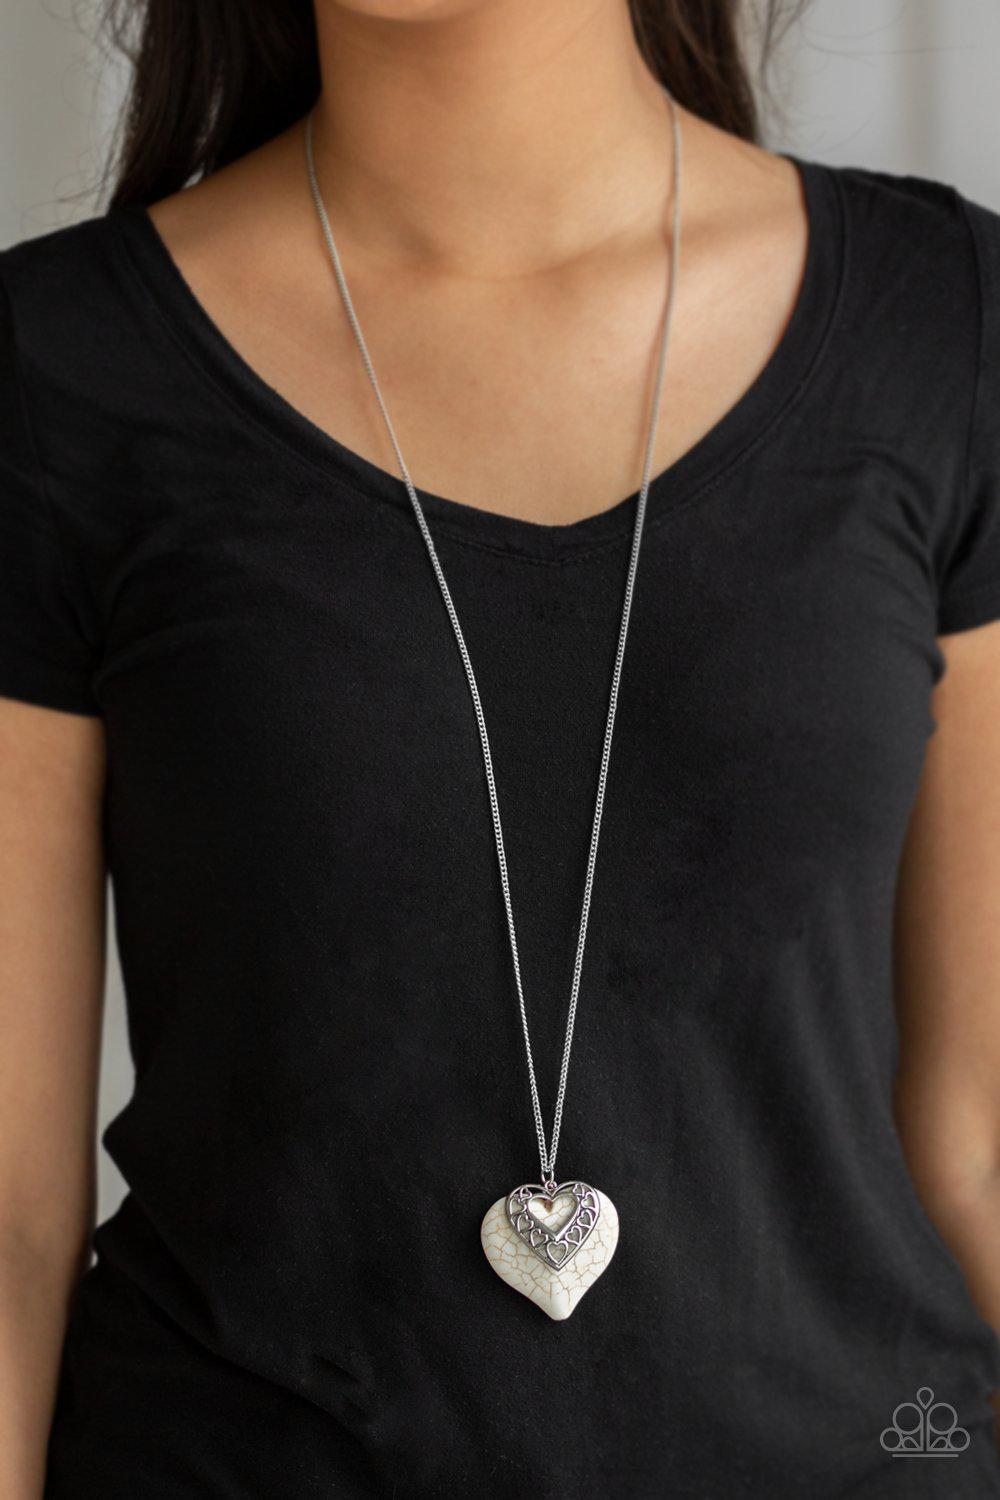 Southern Heart White Stone Heart Necklace - Paparazzi Accessories-CarasShop.com - $5 Jewelry by Cara Jewels